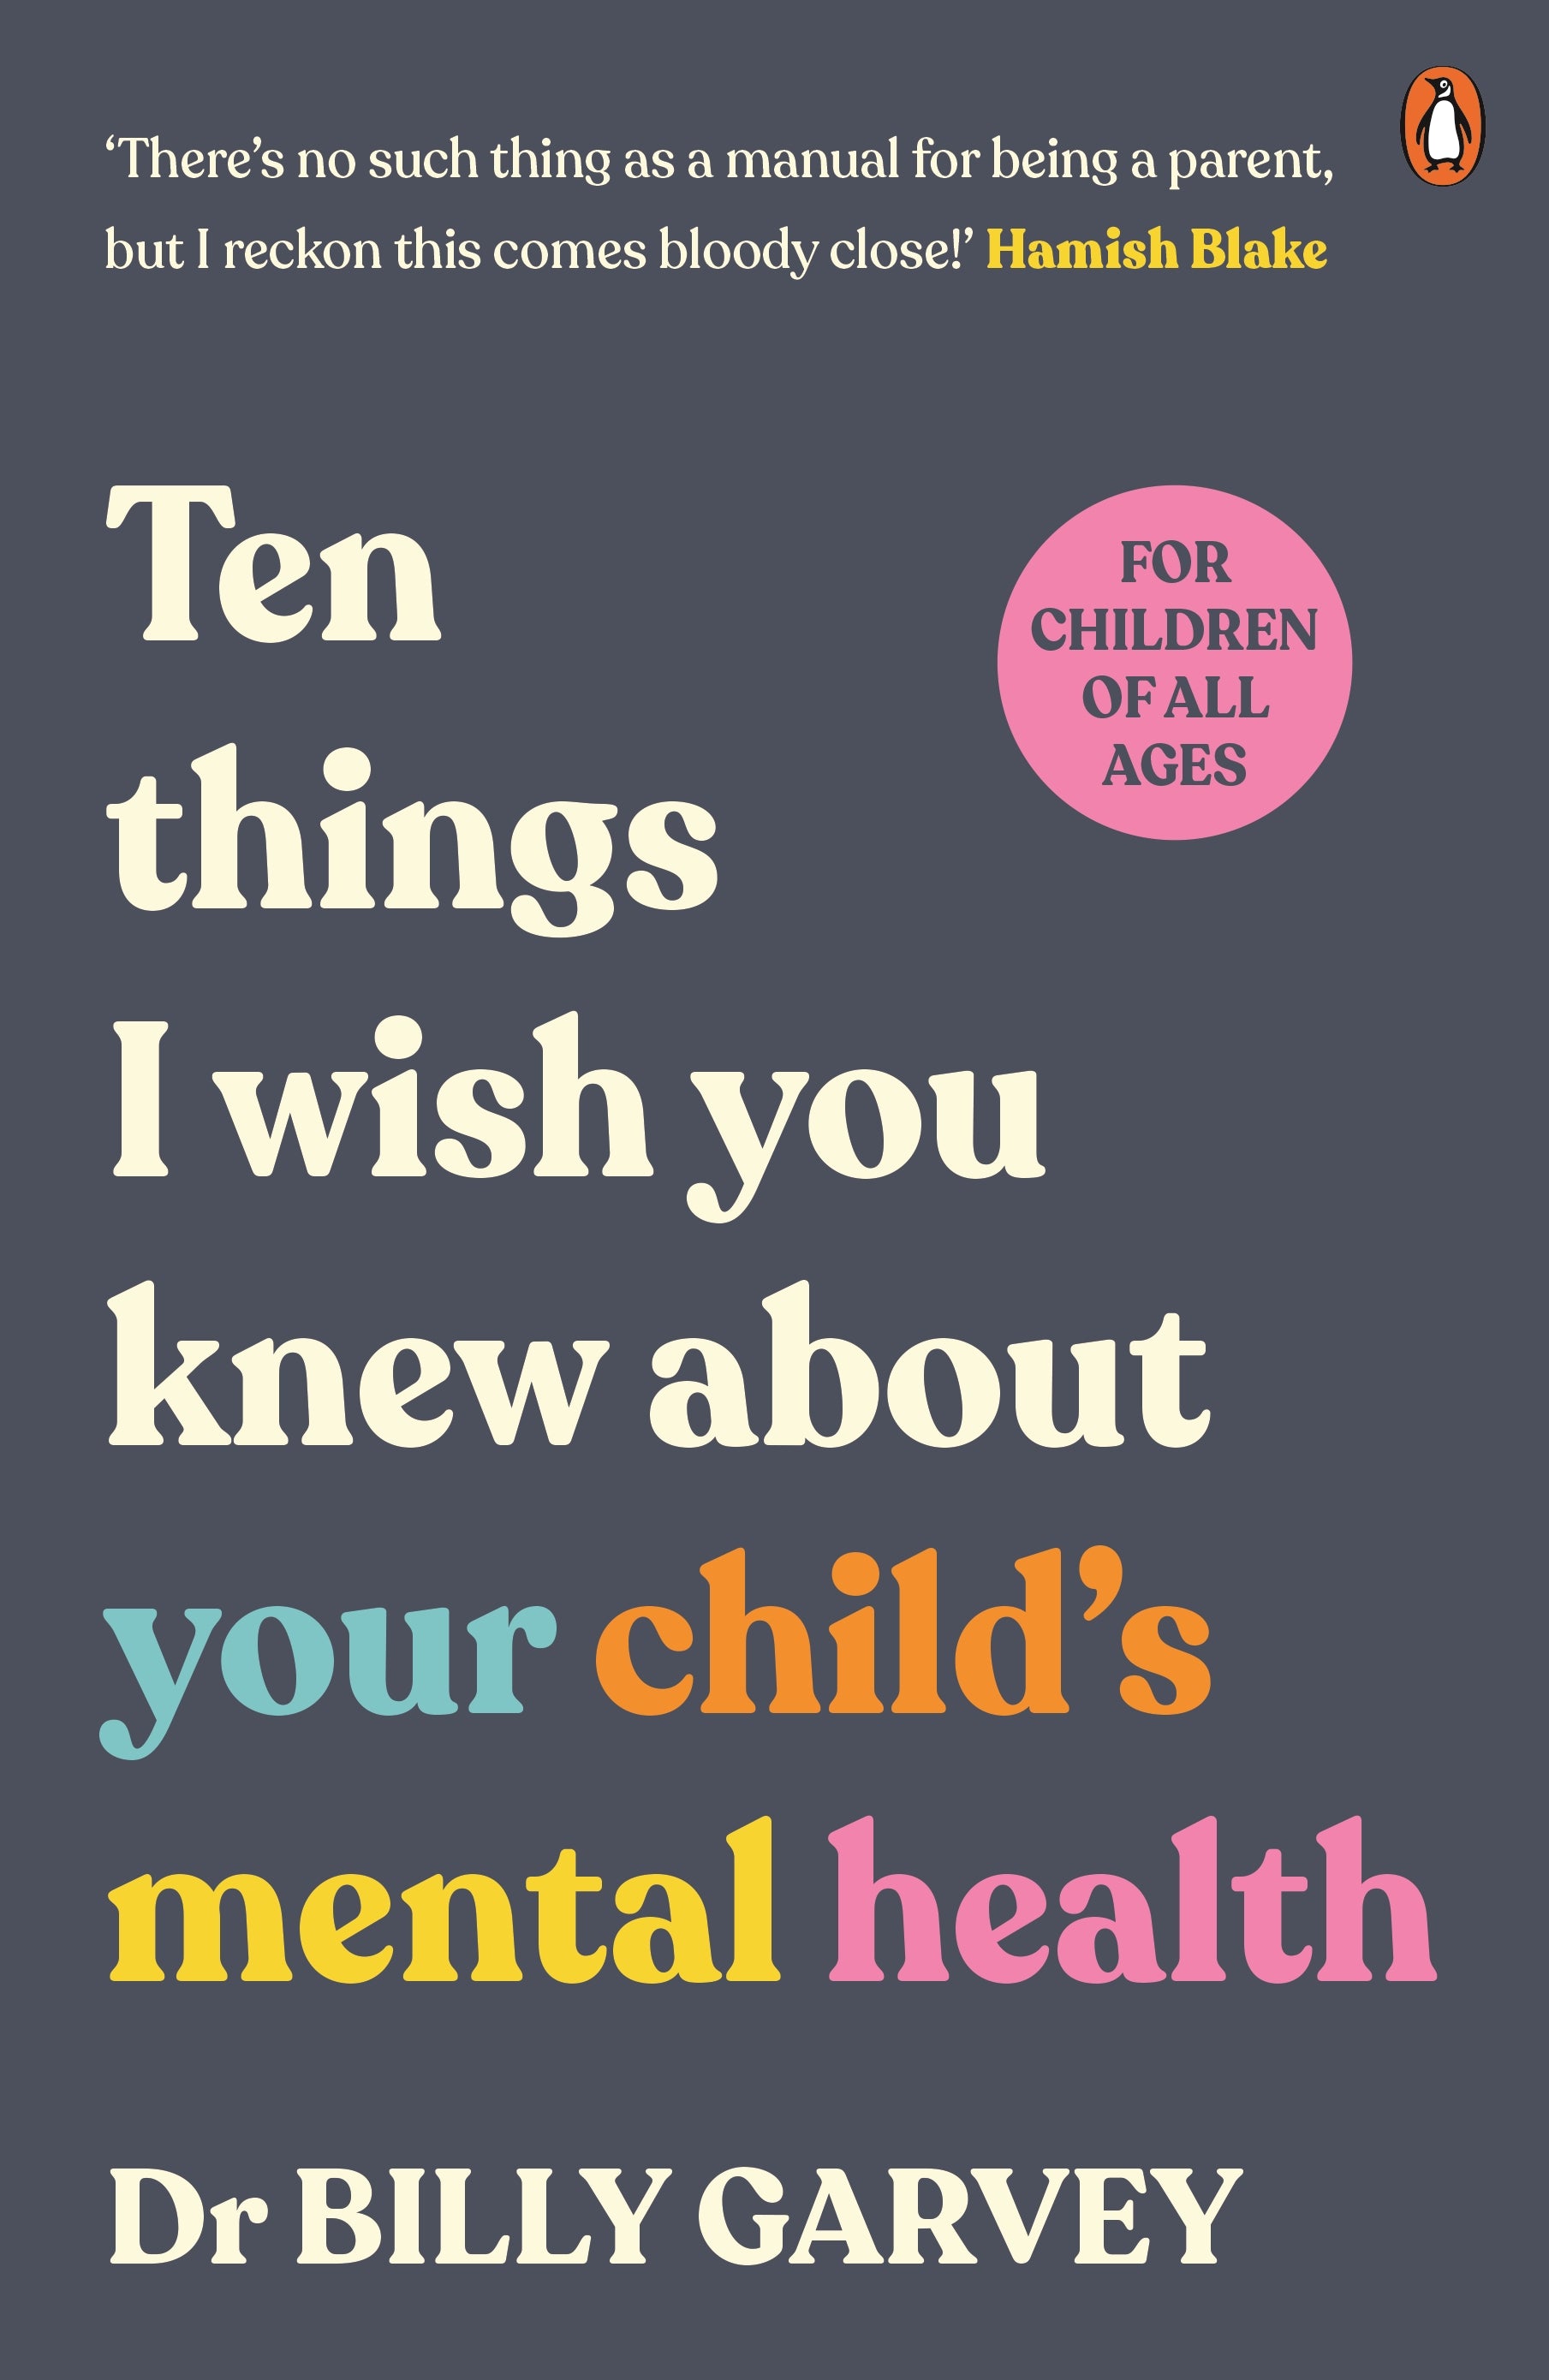 ten things I wish you knew about your child mental health by Dr Billy Garvey